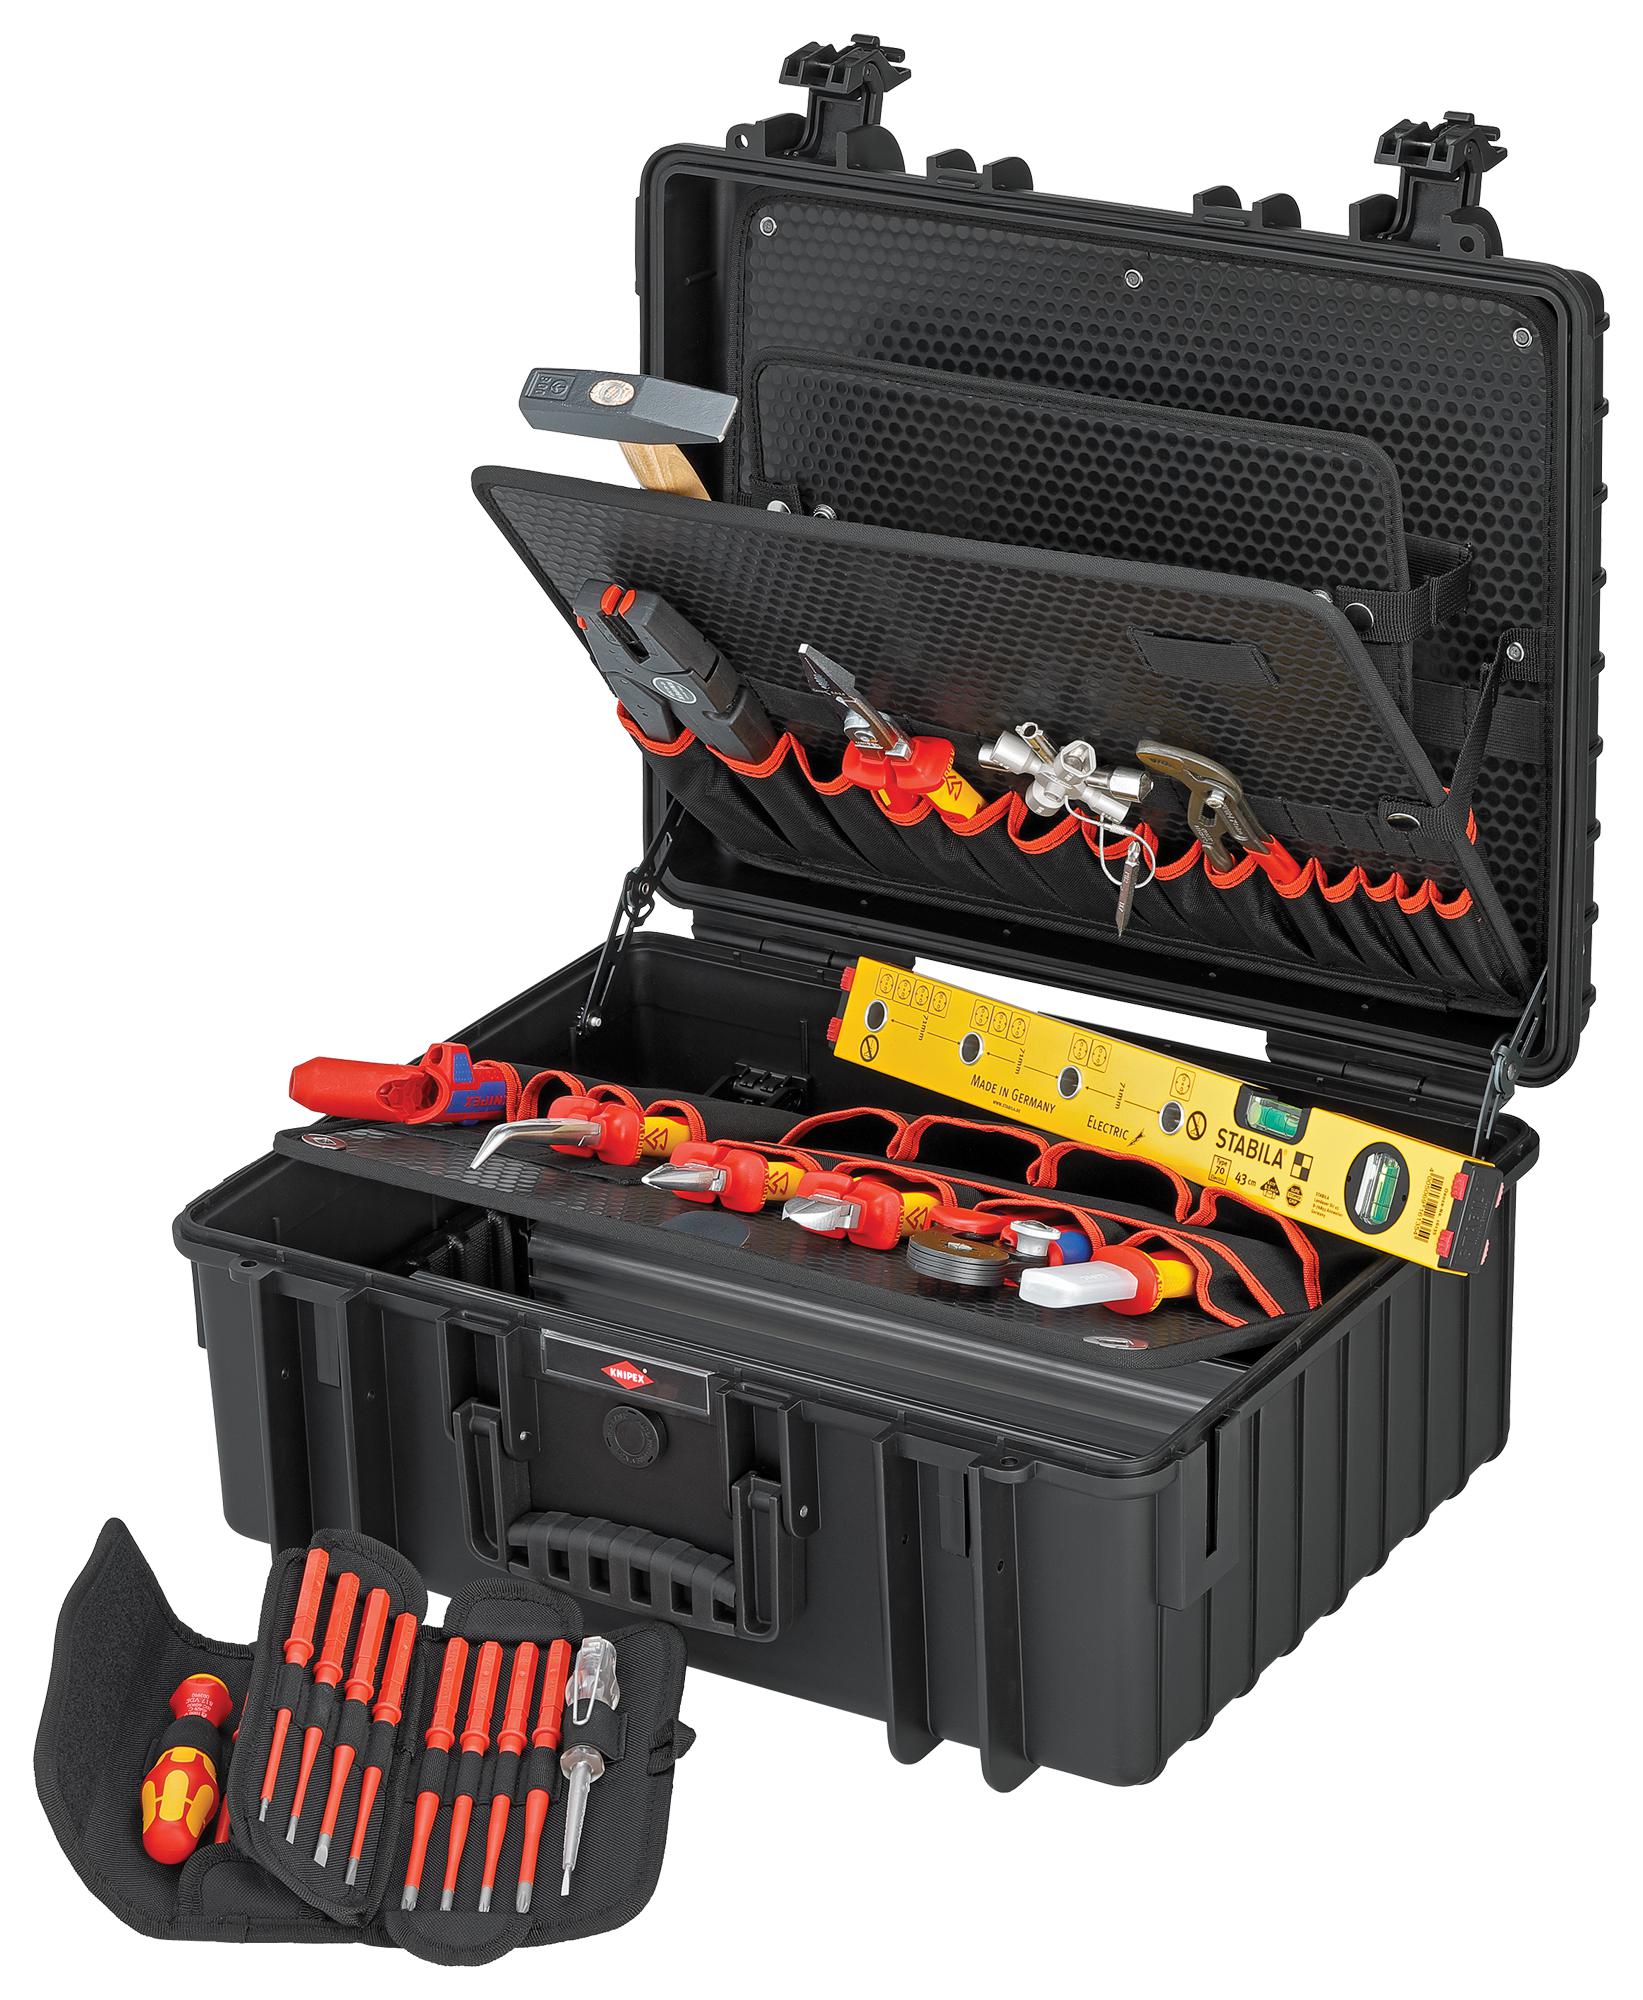 00 21 36 ELECTRICAL TOOL KIT, ROBUST34, 26PC KNIPEX